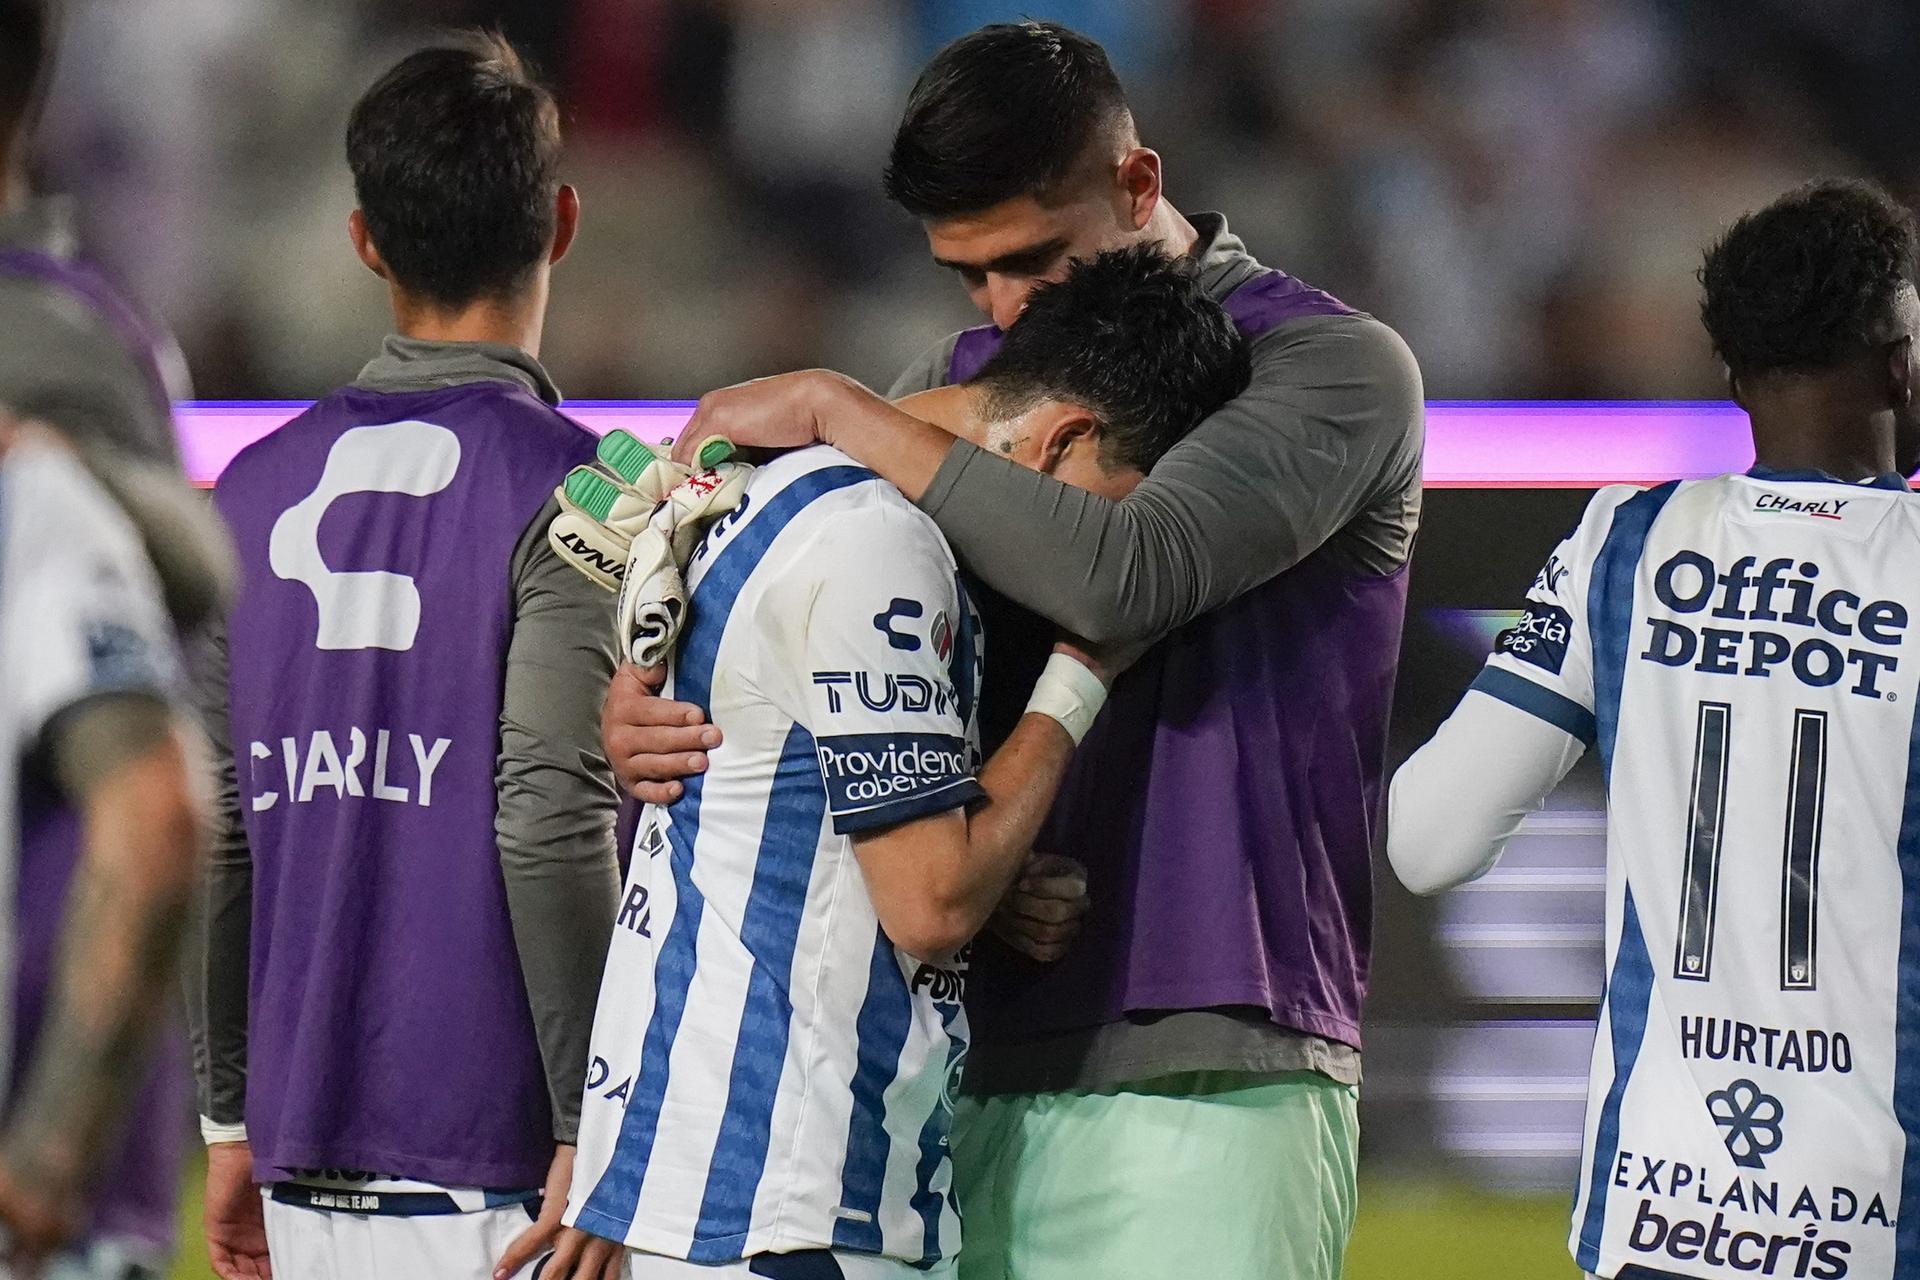 Pachuca vs. Puebla Predictions, Betting Odds, and Picks - Wednesday, September 7, 2022